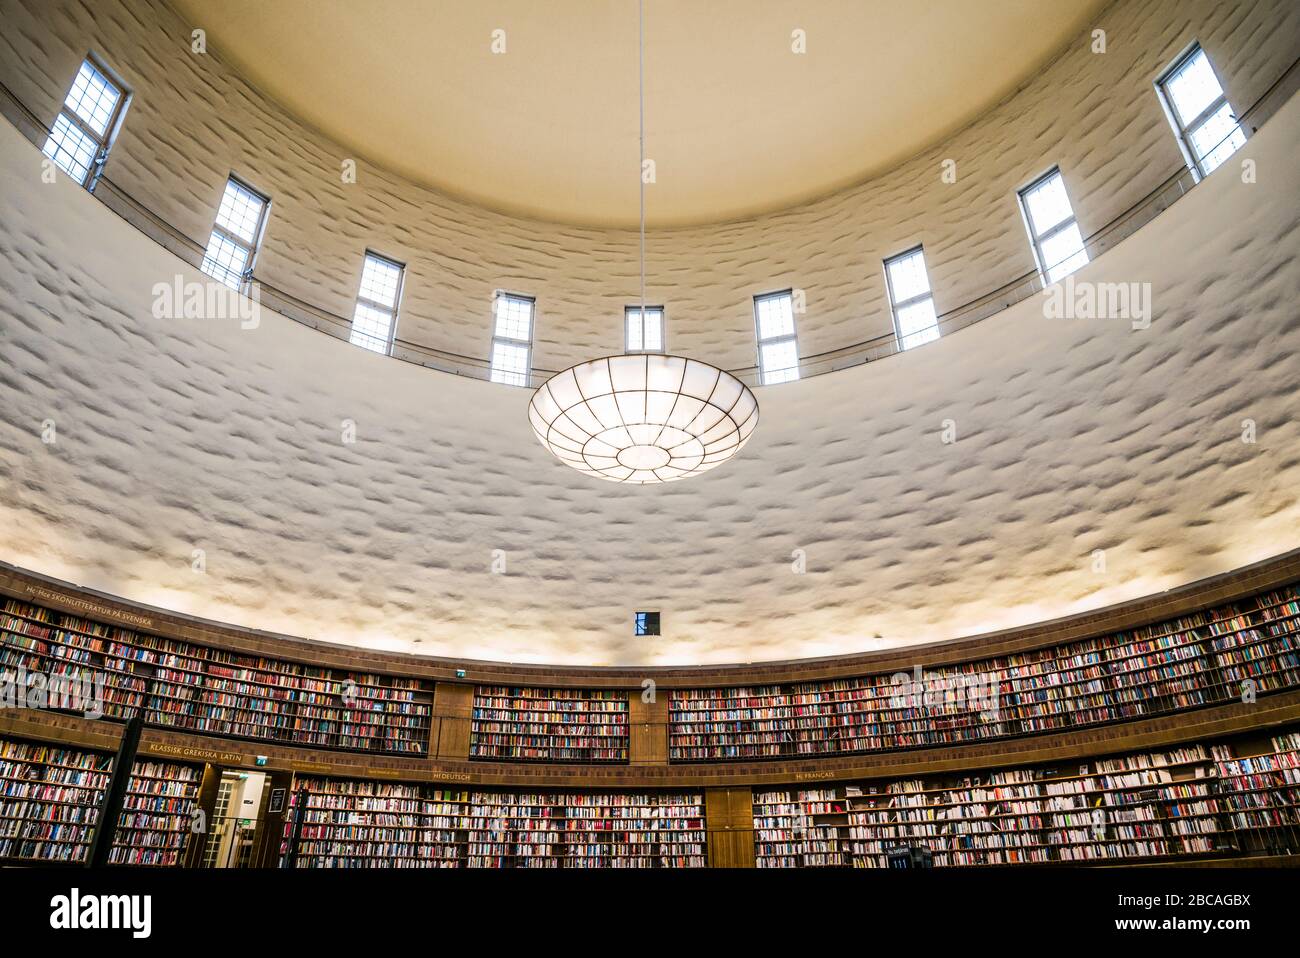 Sweden, Stockholm, City Library, circular interior by architect